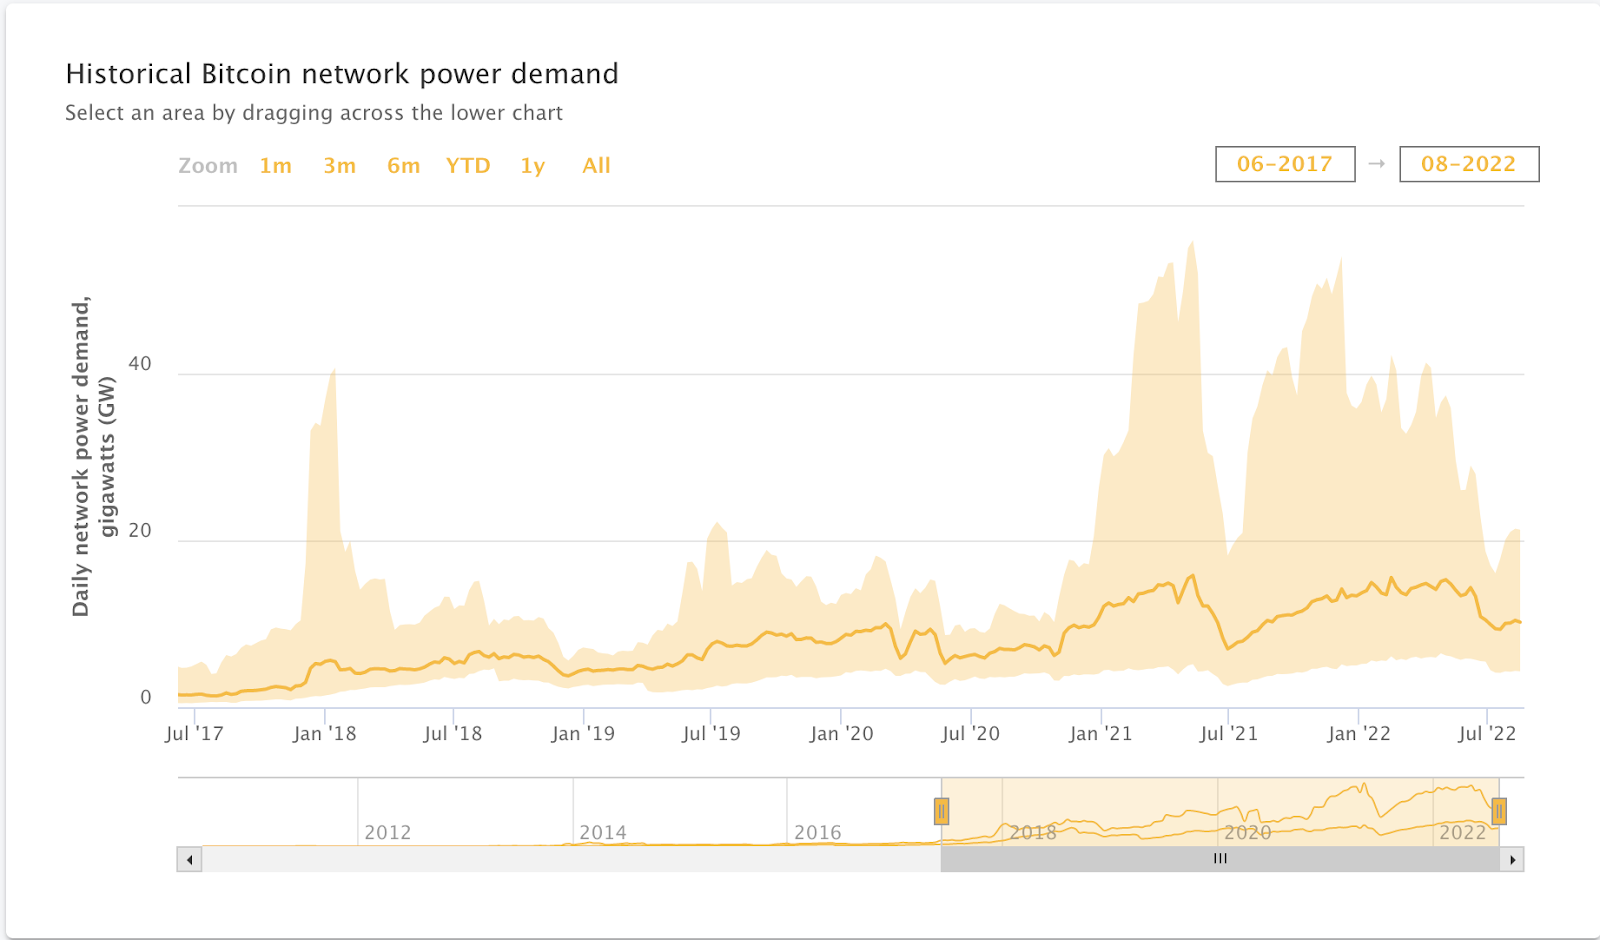 The estimated daily Power Demand of the Bitcoin network